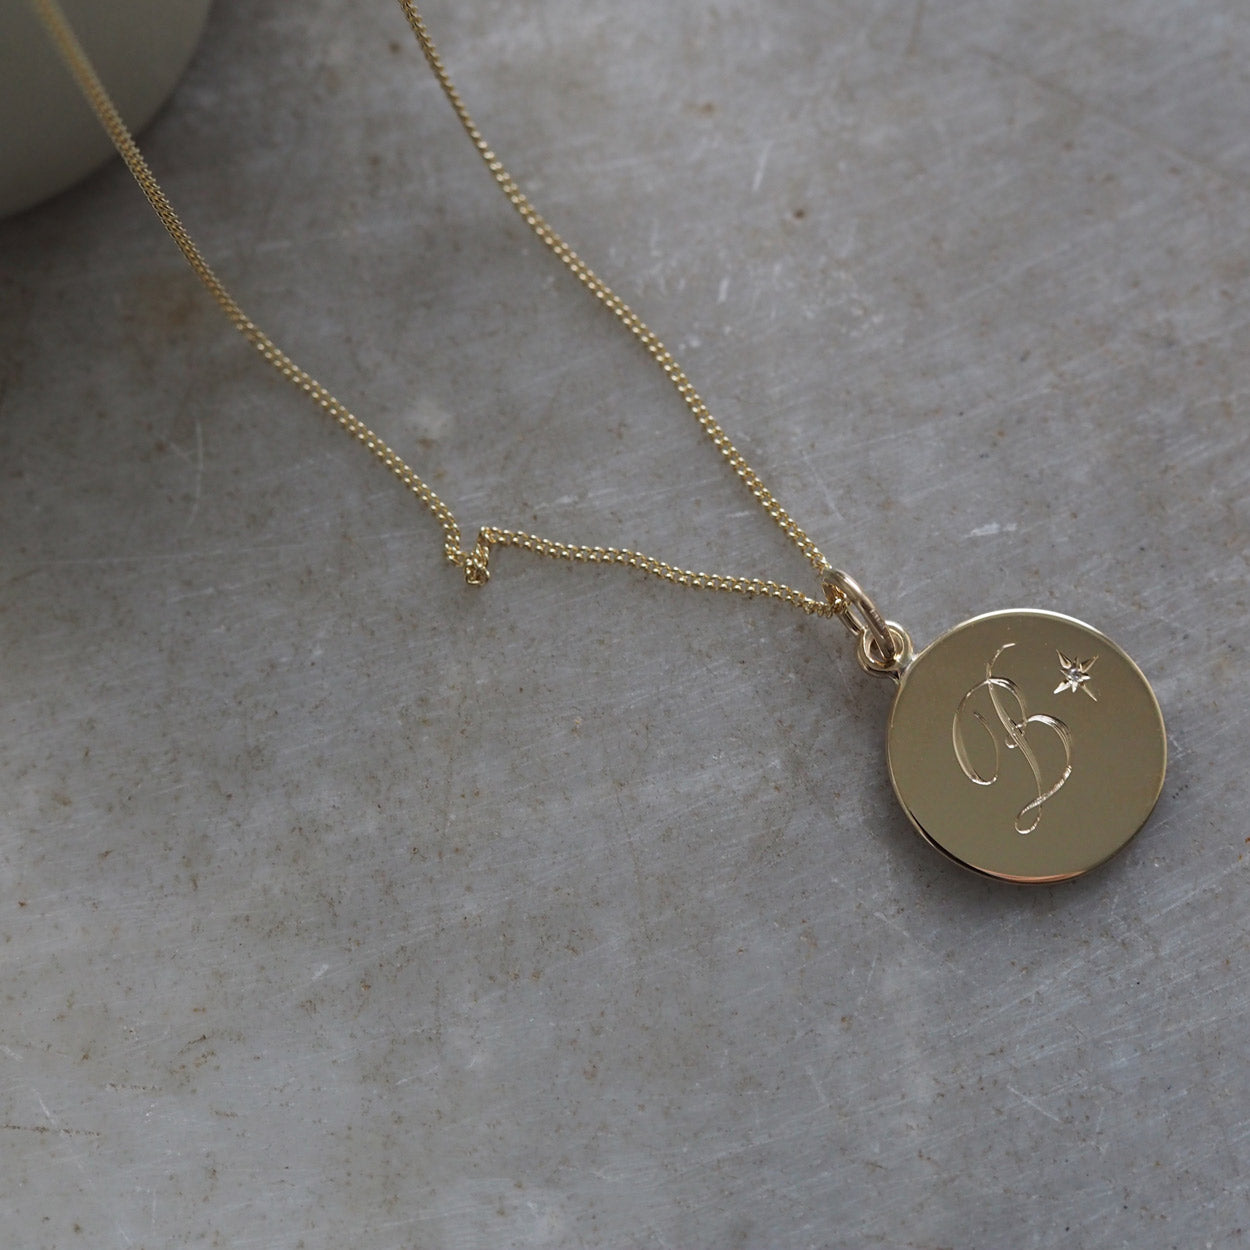 Diamond Initial Necklace in Solid Yellow Gold with Victoriana Star-Setting and Hand-Engraved Detail